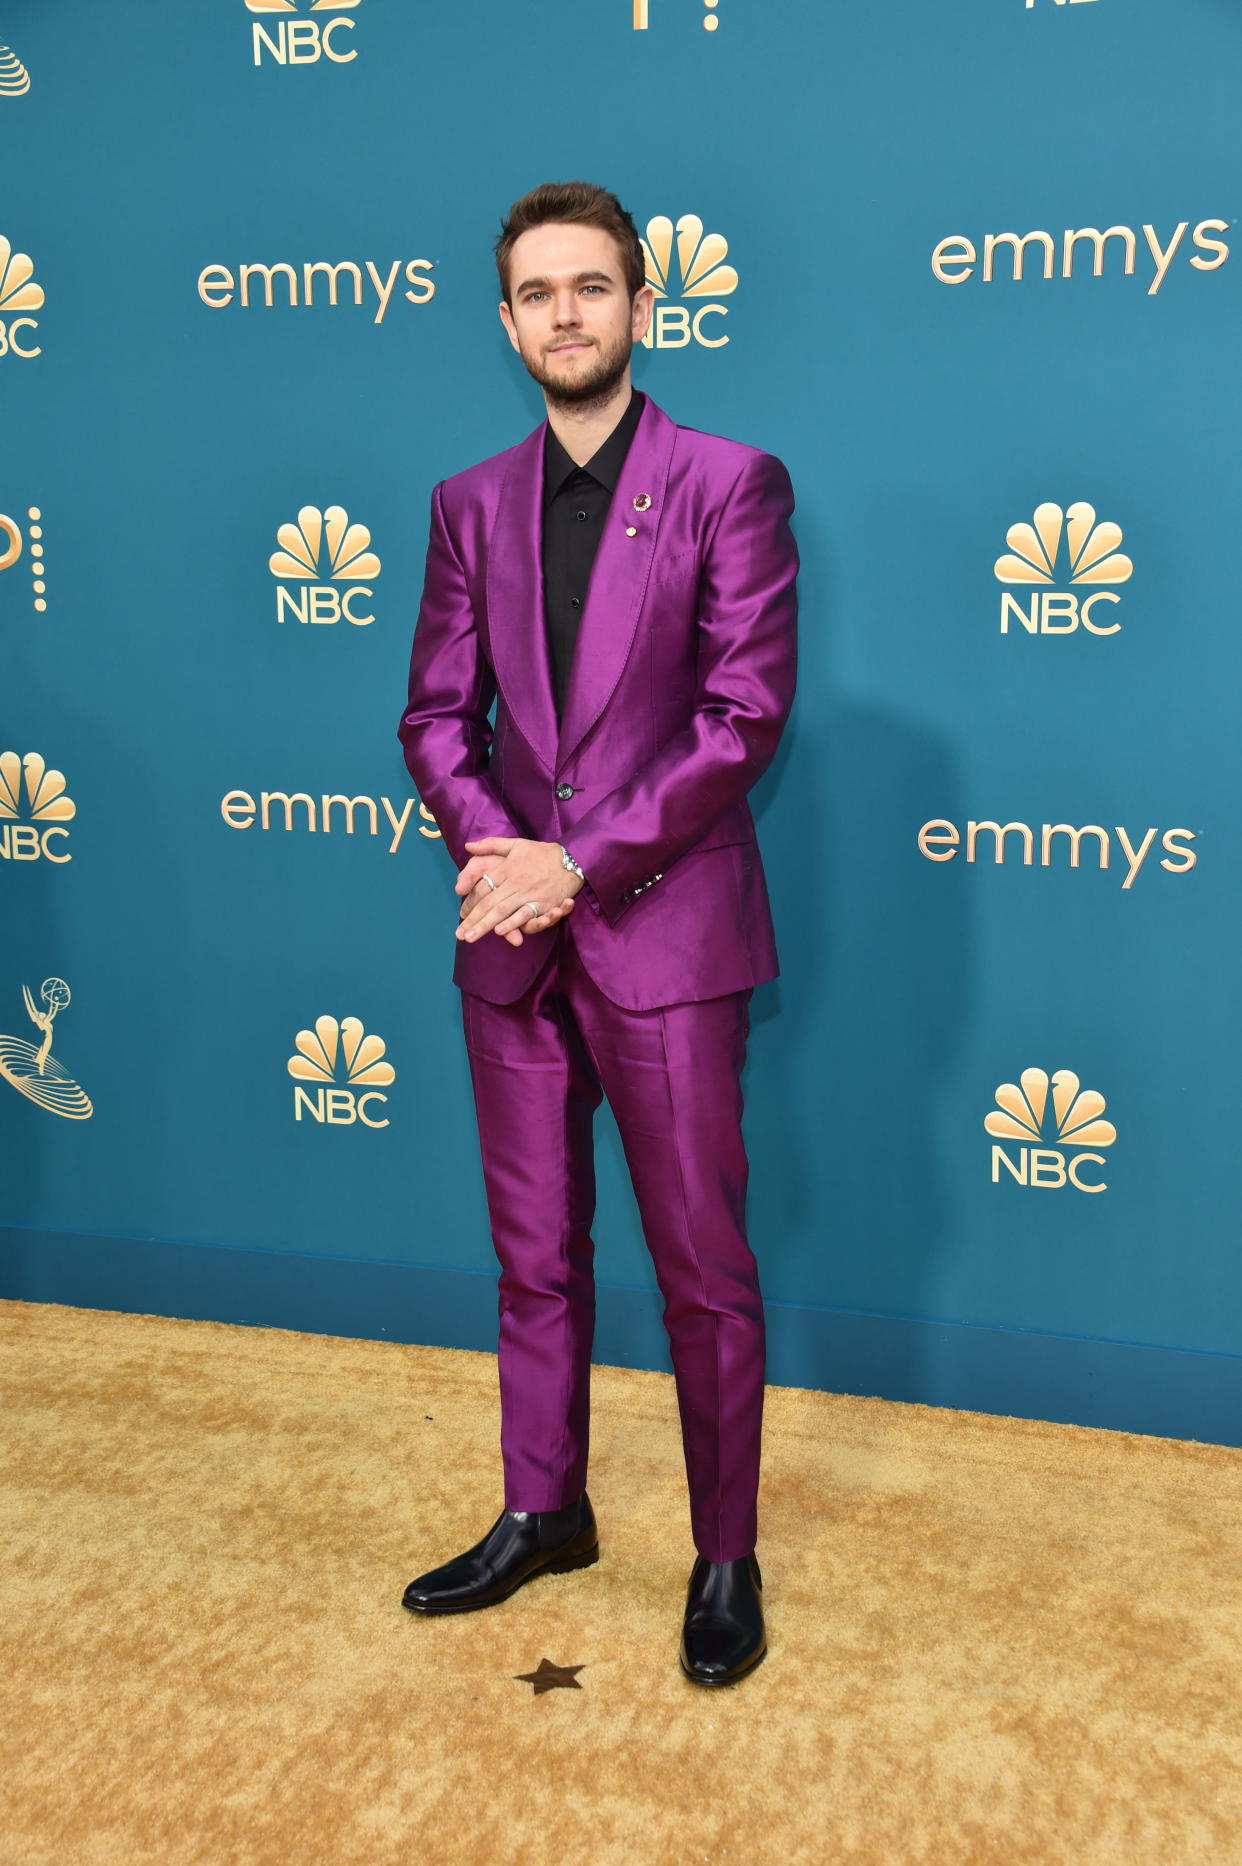 Actor Zedd arrives for the 74th Emmy Awards at the Microsoft Theater in Los Angeles, California, on September 12, 2022. (Photo by Chris Delmas / AFP) (Photo by CHRIS DELMAS/AFP via Getty Images)